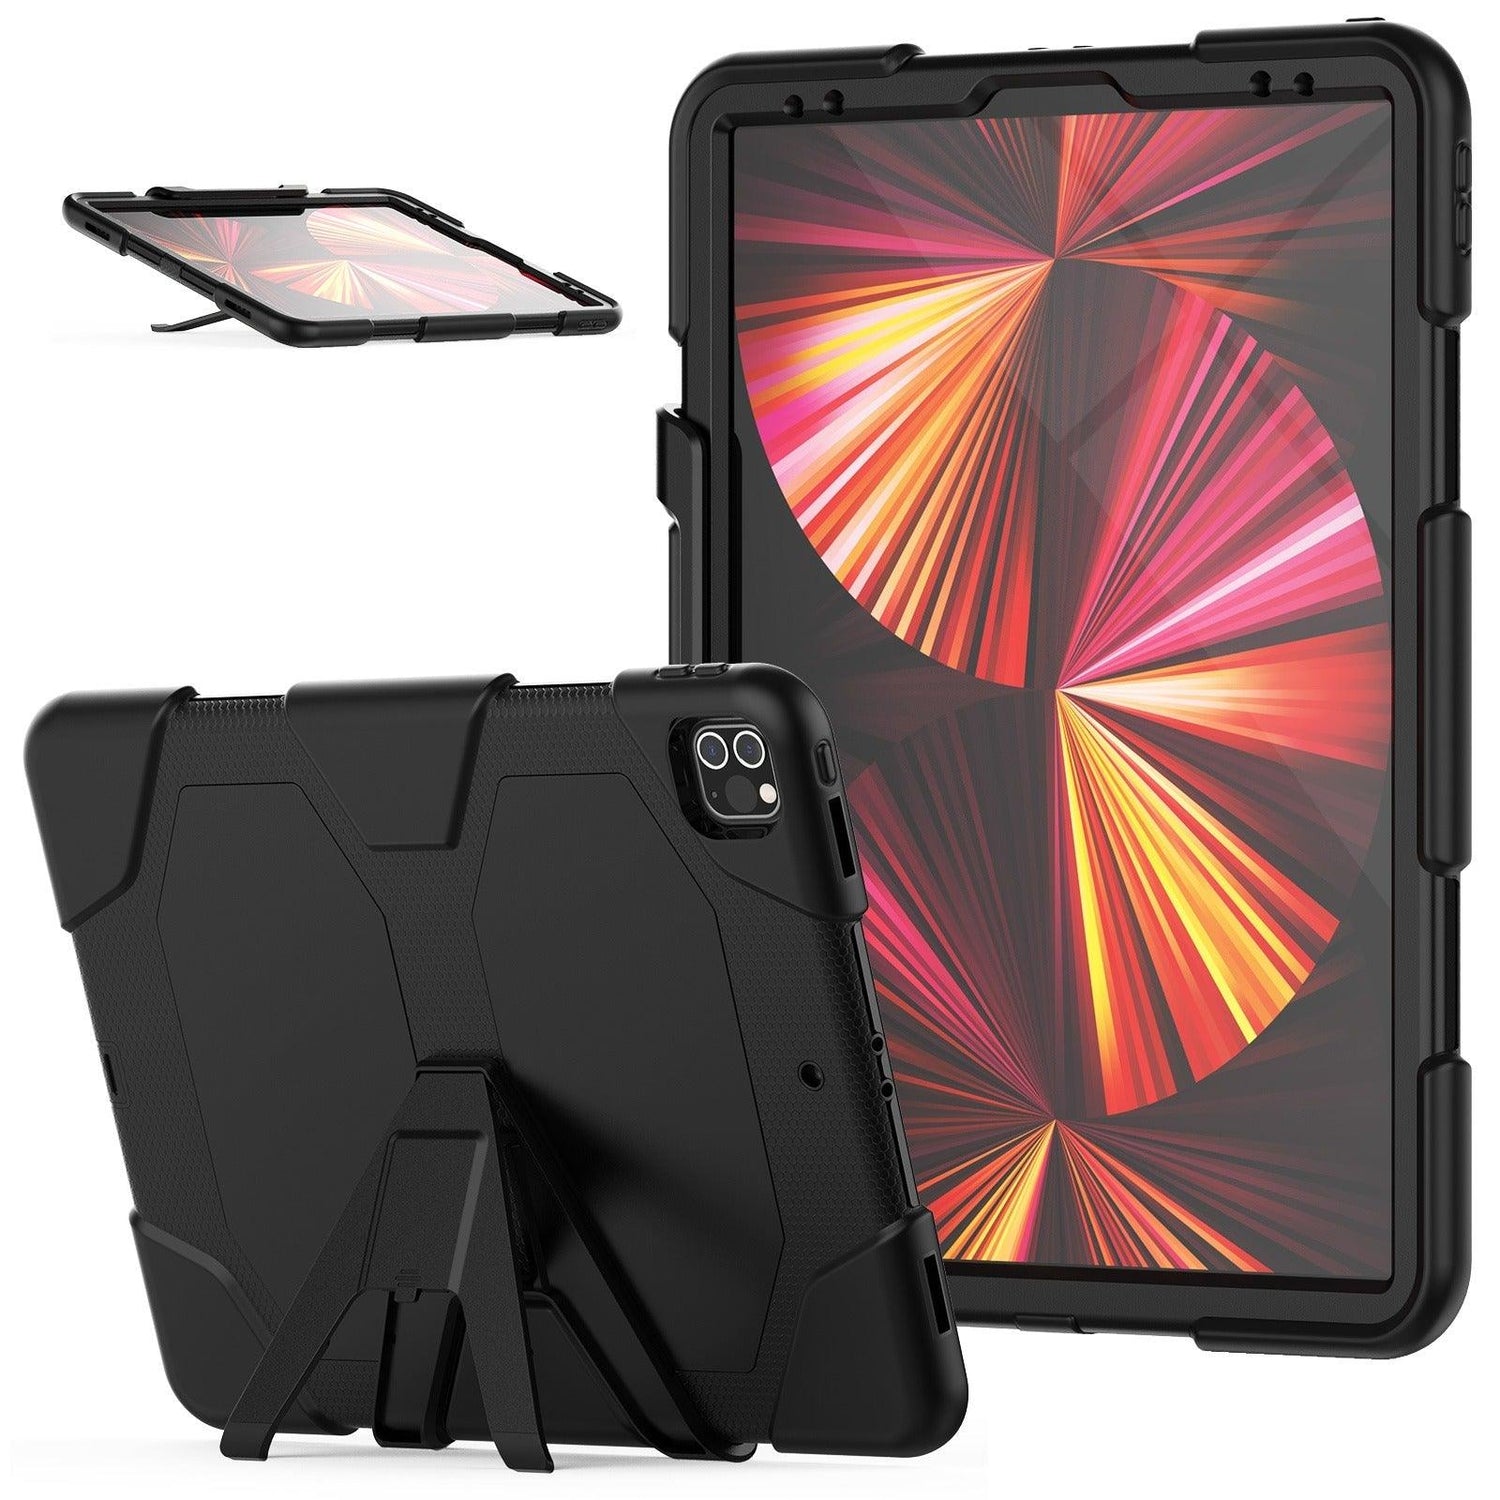 Aetherius Heavy Duty iPad Pro Case with Kickstand and Screen Protector - Astra Cases IE